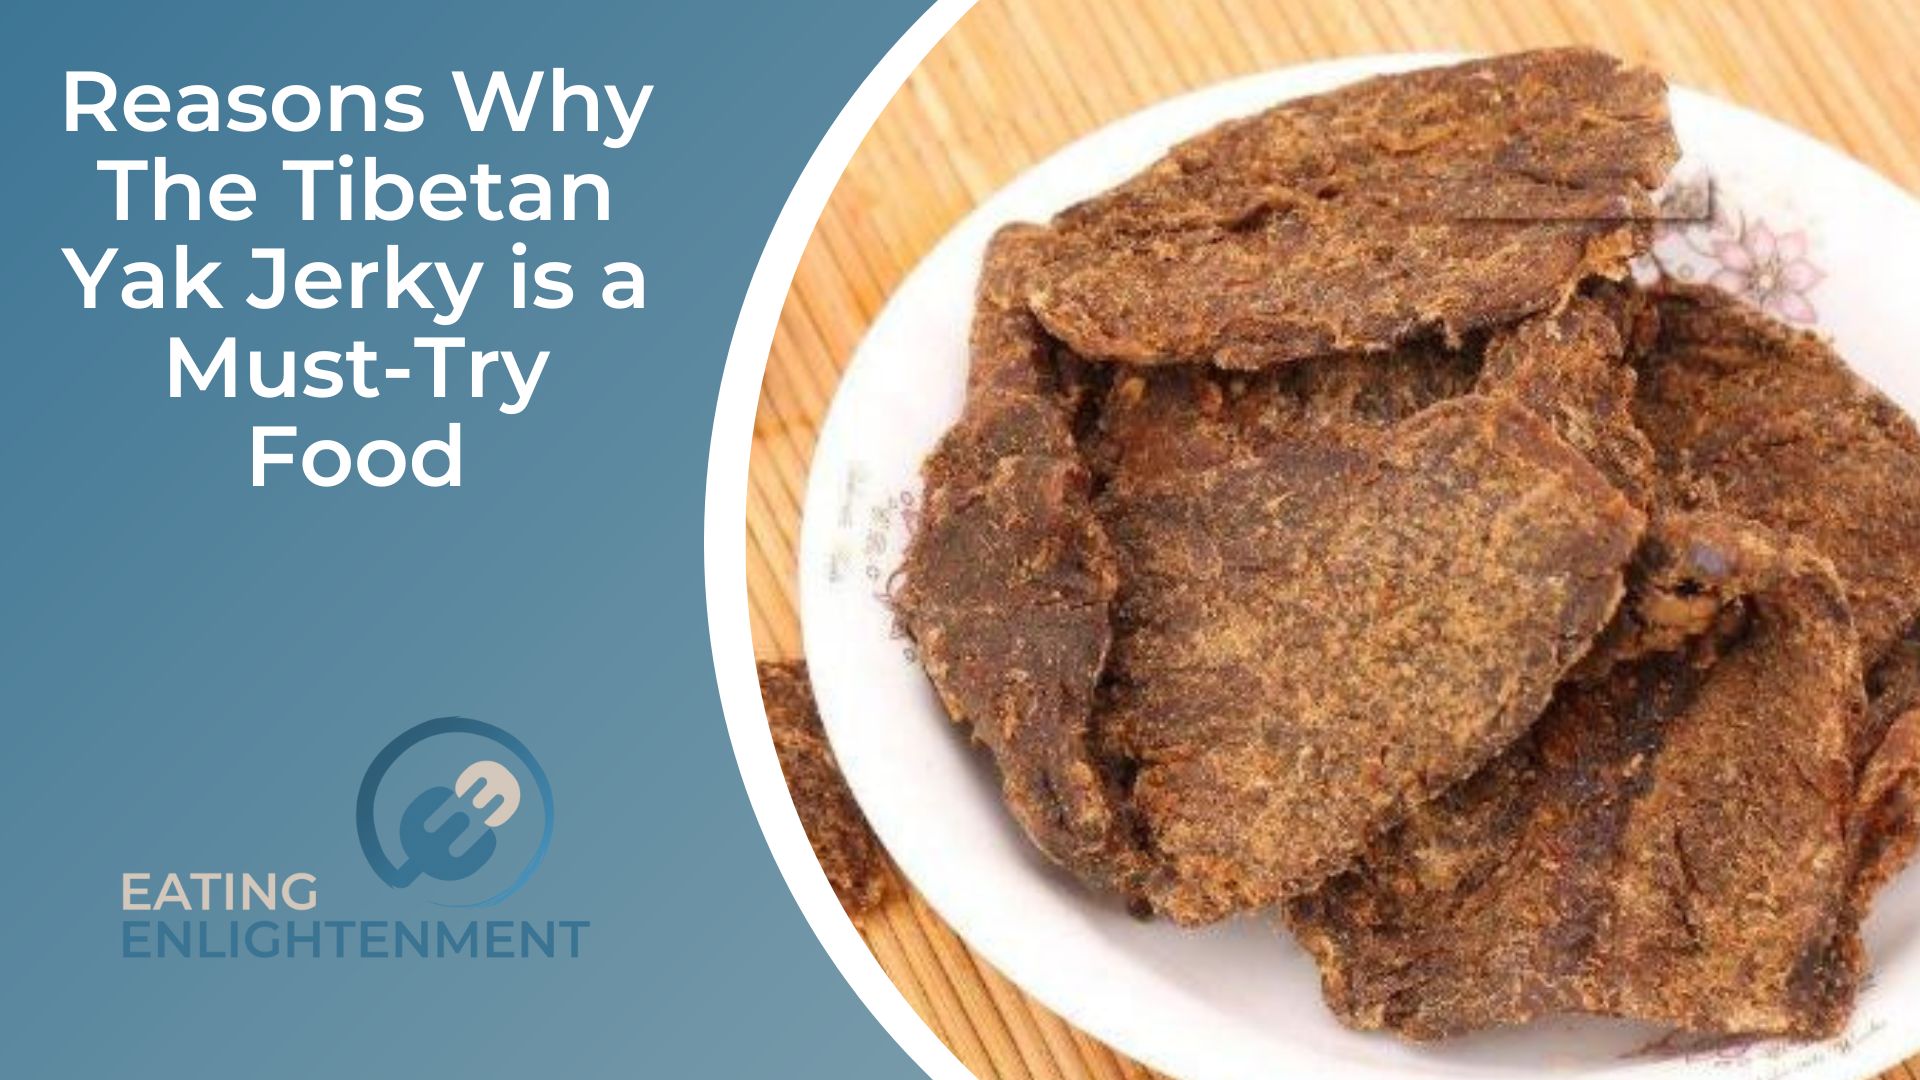 13 Reasons Why The Tibetan Yak Jerky is a Must-Try Food